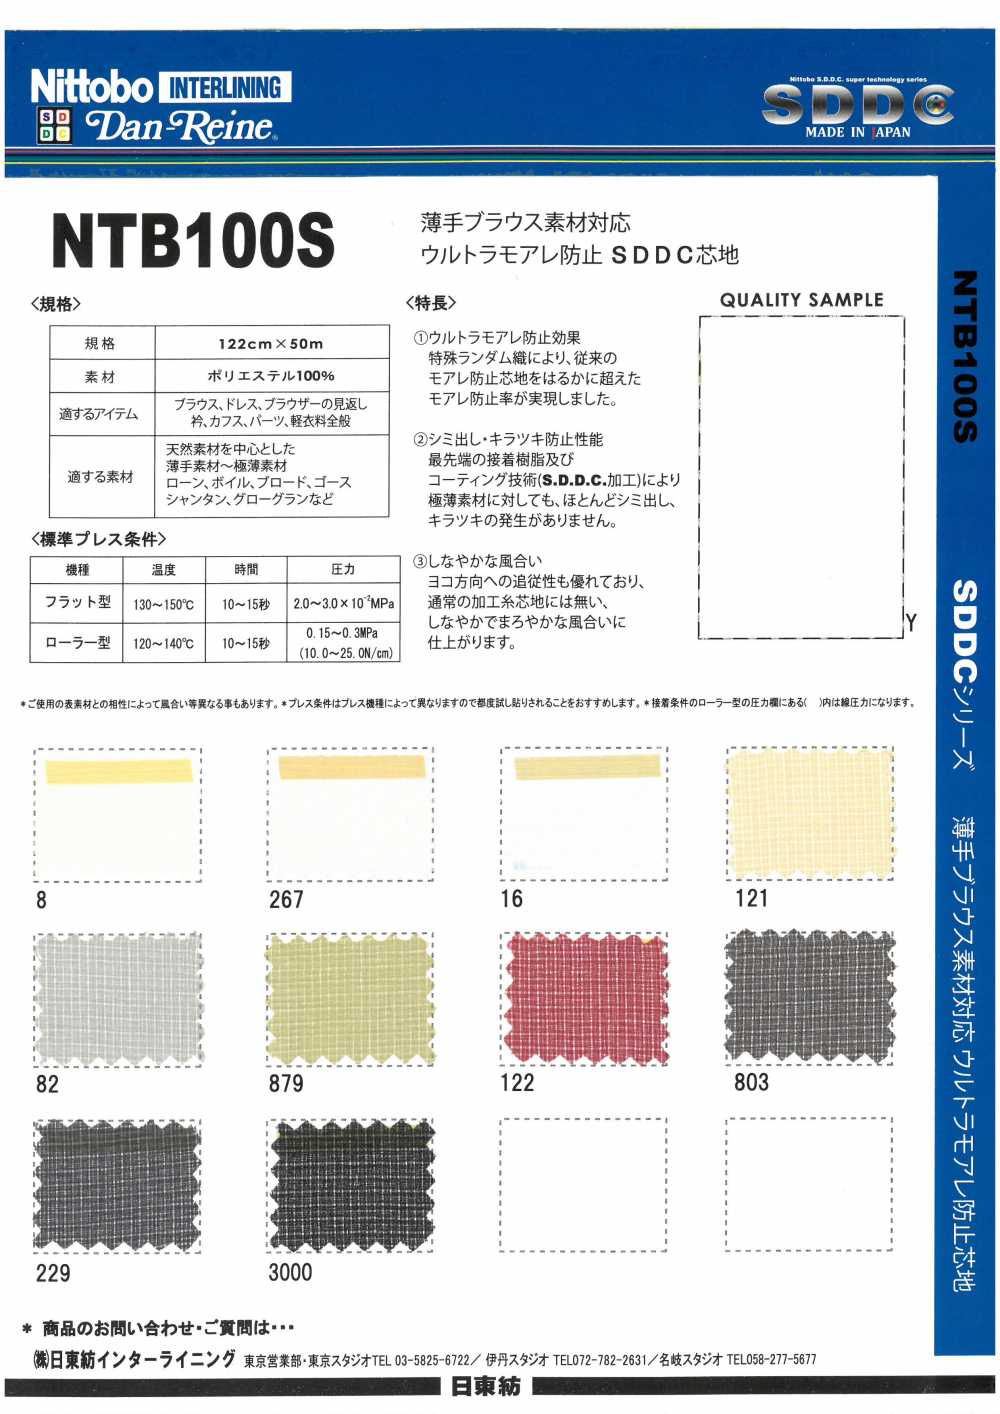 NTB100S Thin Blouse Material Compatible Ultra Moire Prevention SDDC Interlining 15D Nittobo